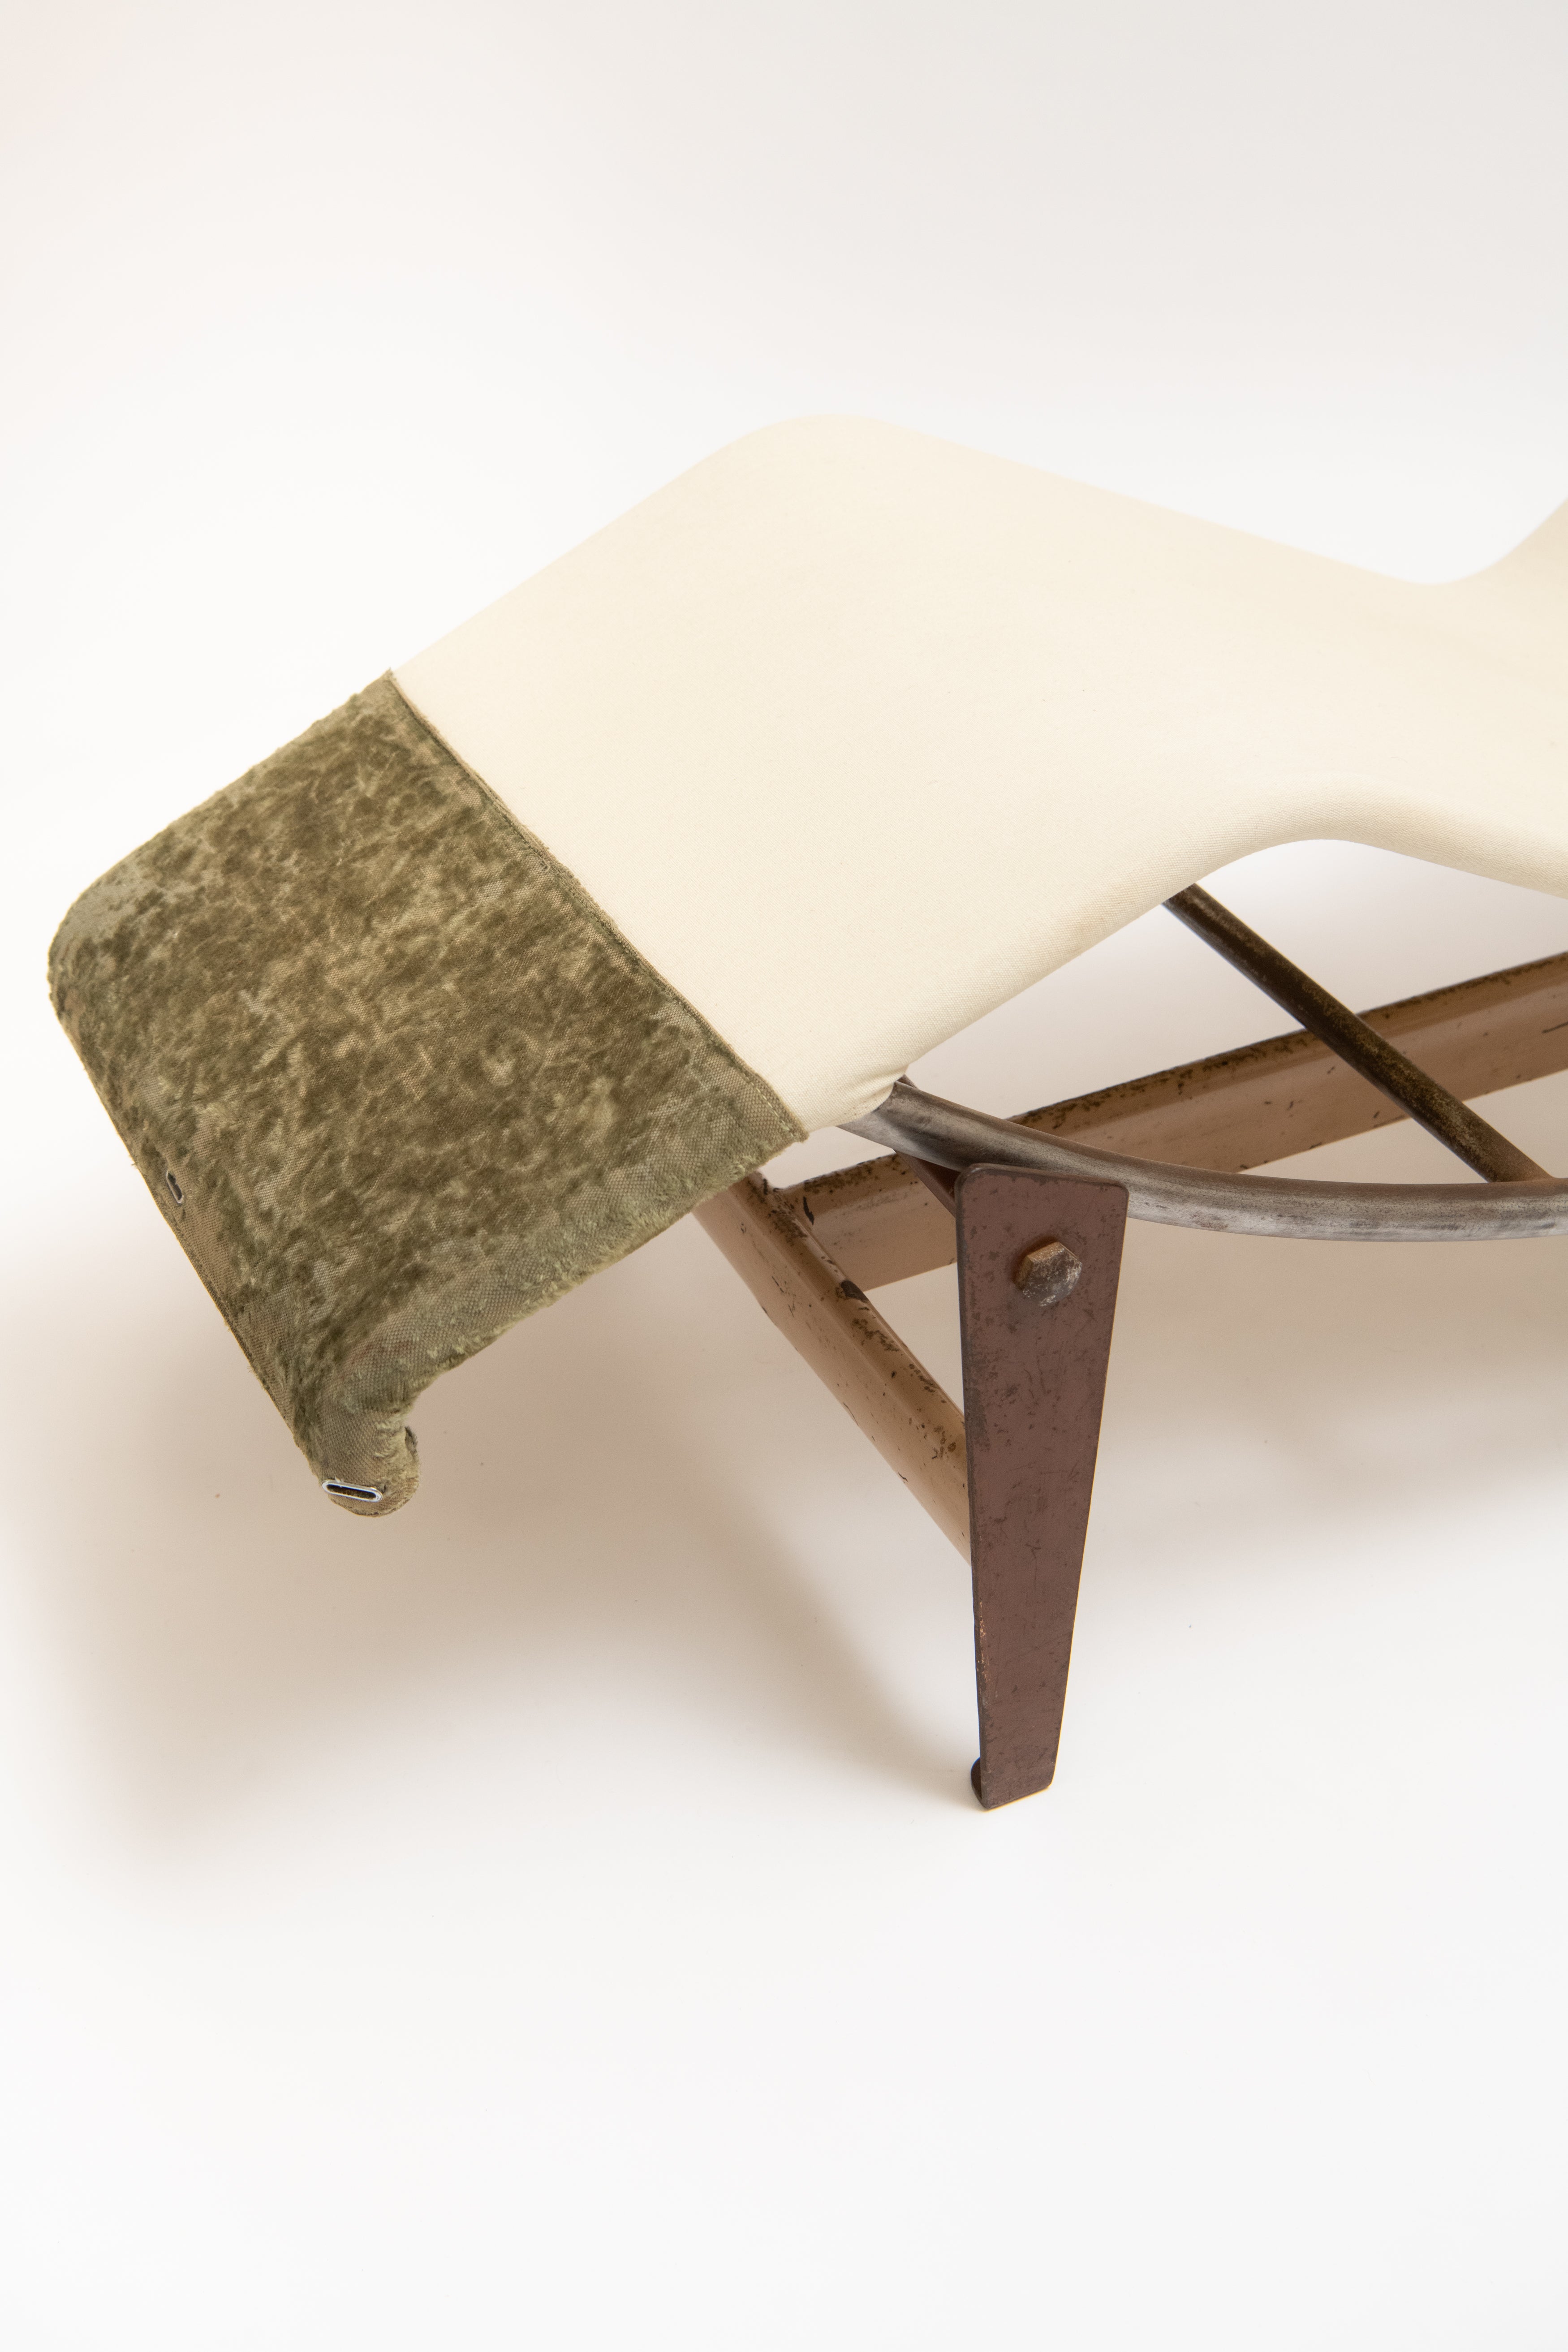 Le Corbusier, Charlotte Perriand & Pierre Jeanneret - Designer furniture by